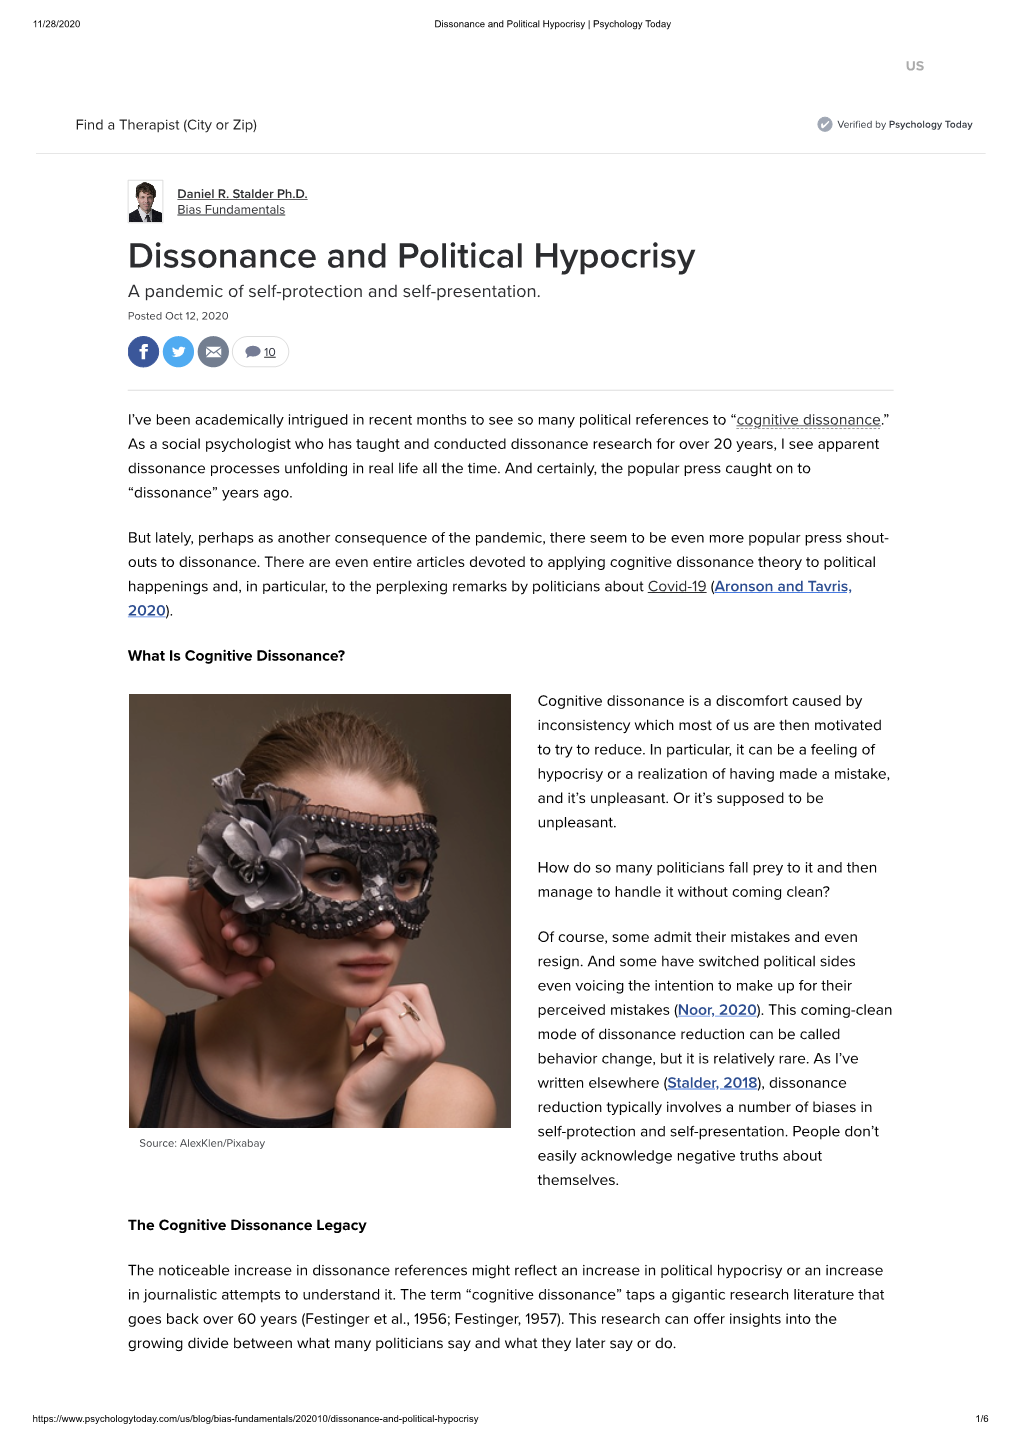 Dissonance and Political Hypocrisy from Psychology Today